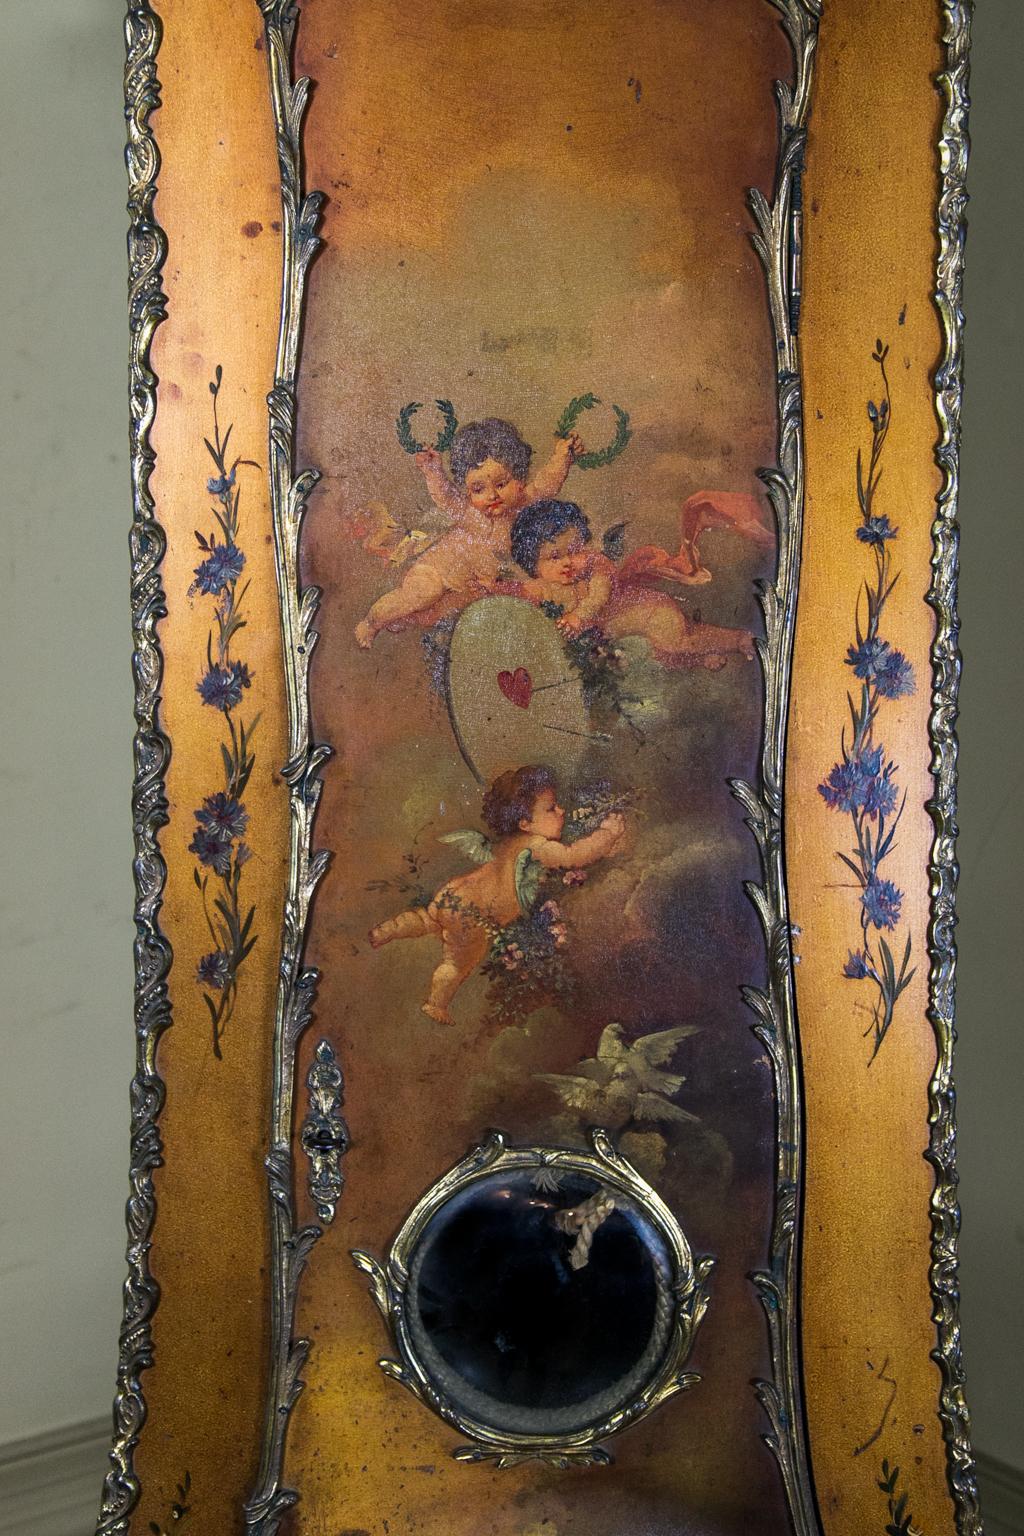 Vernis Martin style grandfather clock, with the front and sides richly embellished with ormolu mounts. The door is painted with cupids holding wreaths and doves surrounding a convex glass pendulum door. The sides have elaborate floral, musical, and